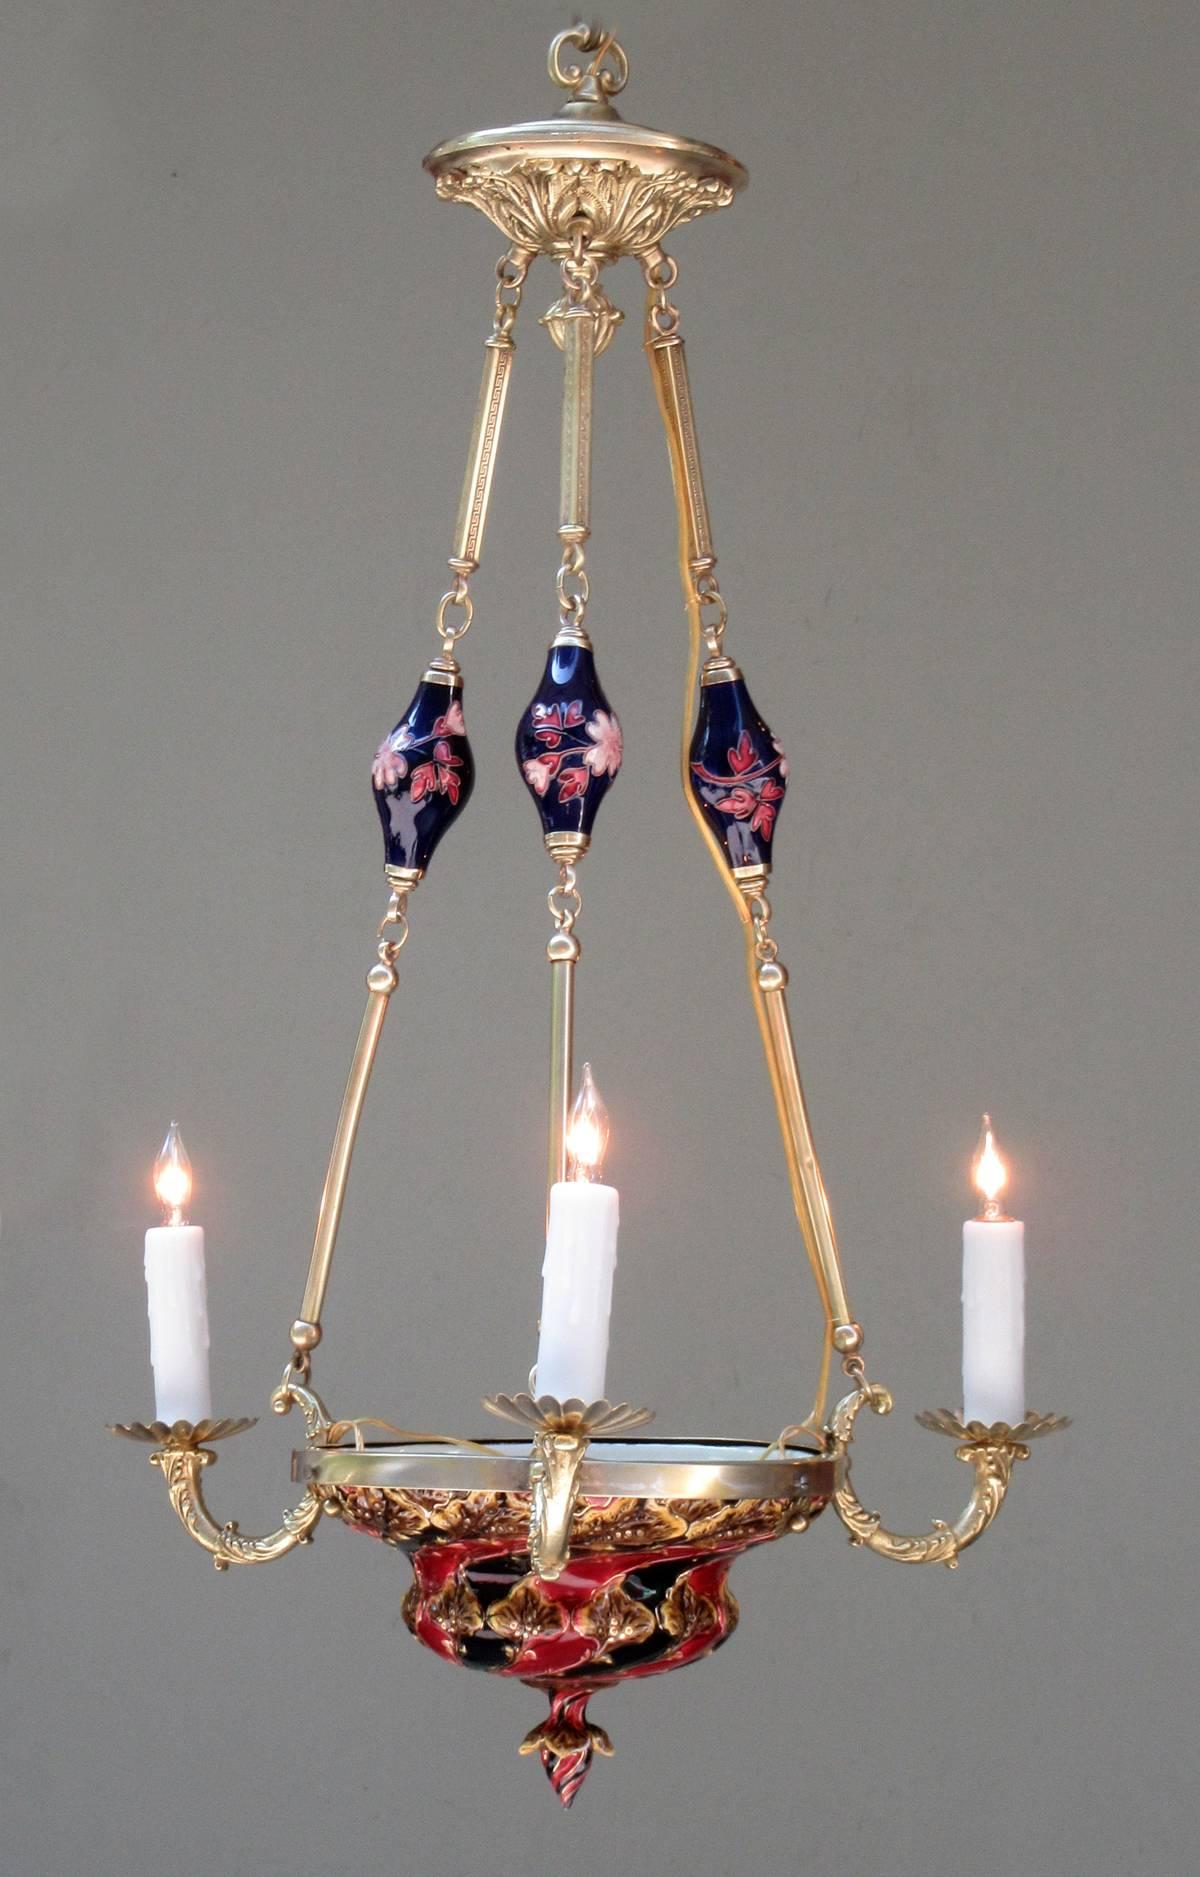 An early 20th century Bohemia (now Czech Republic) Art Nouveau Majolica and bronze chandelier, circa 1900, stamped with mark of ceramics maker Julius Biela Dressler. The chandelier is suspended by a bronze canopy with three rods accented with floral